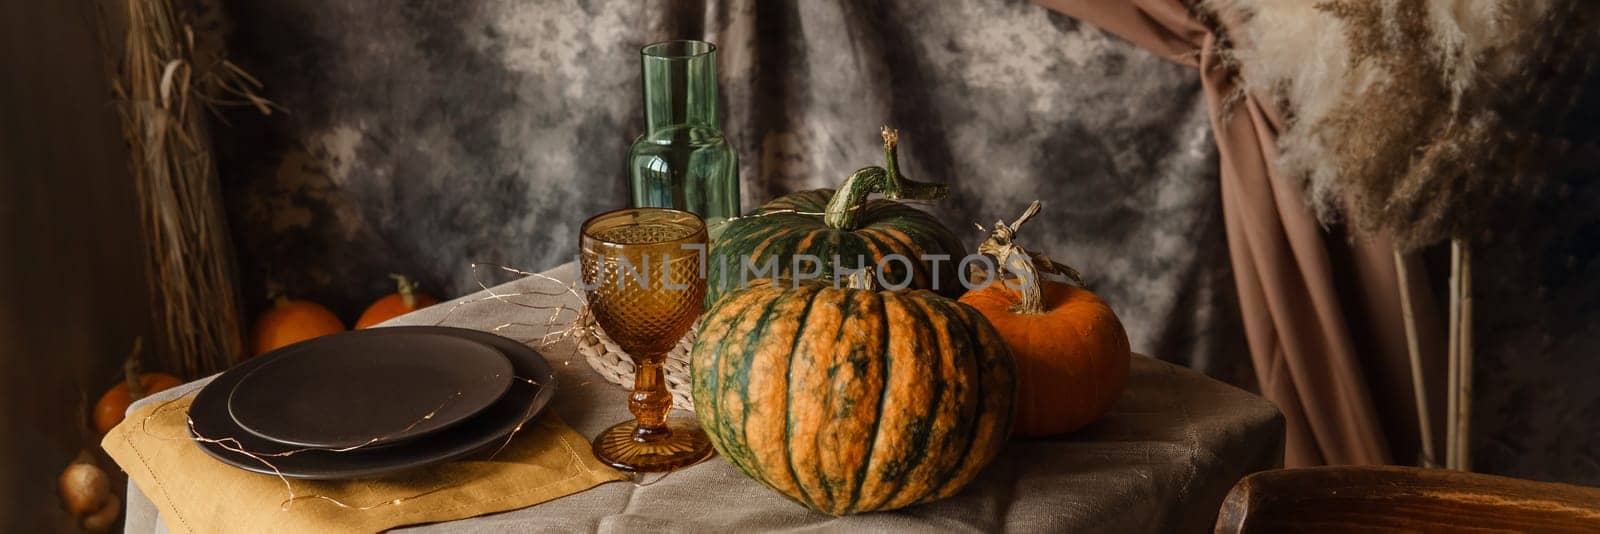 Autumn interior: a table covered with dishes, pumpkins, chair, casual arrangement of Japanese pampas grass. Interior in the photo Studio